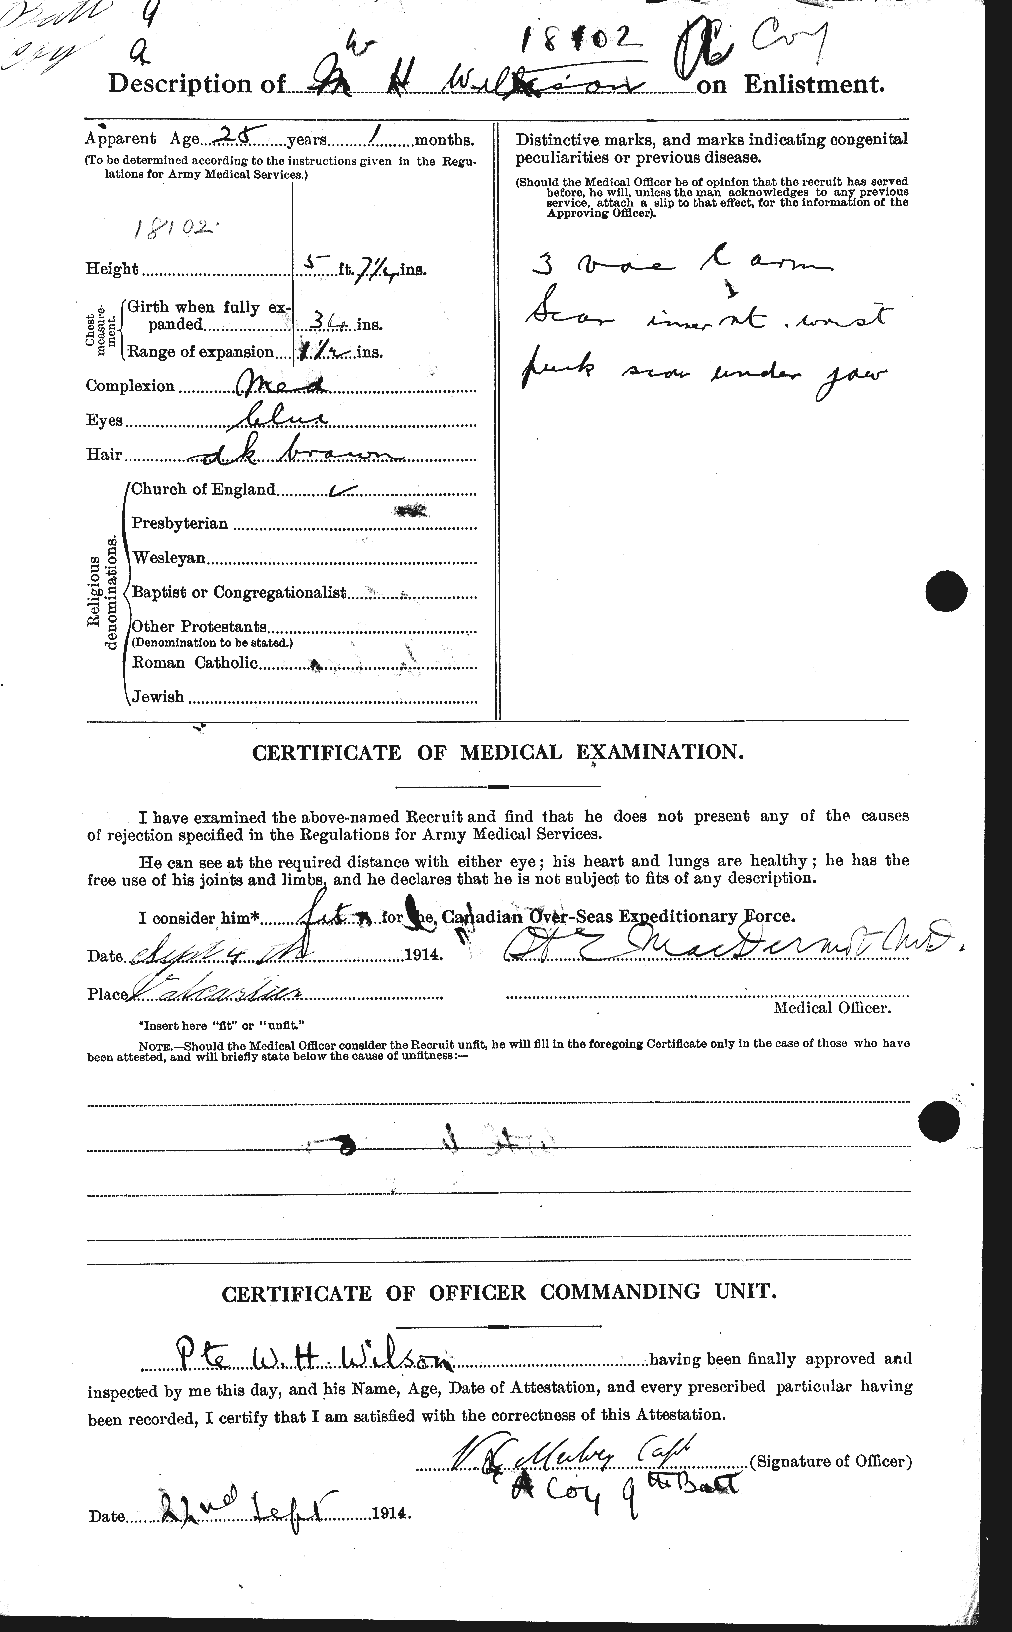 Personnel Records of the First World War - CEF 682008b